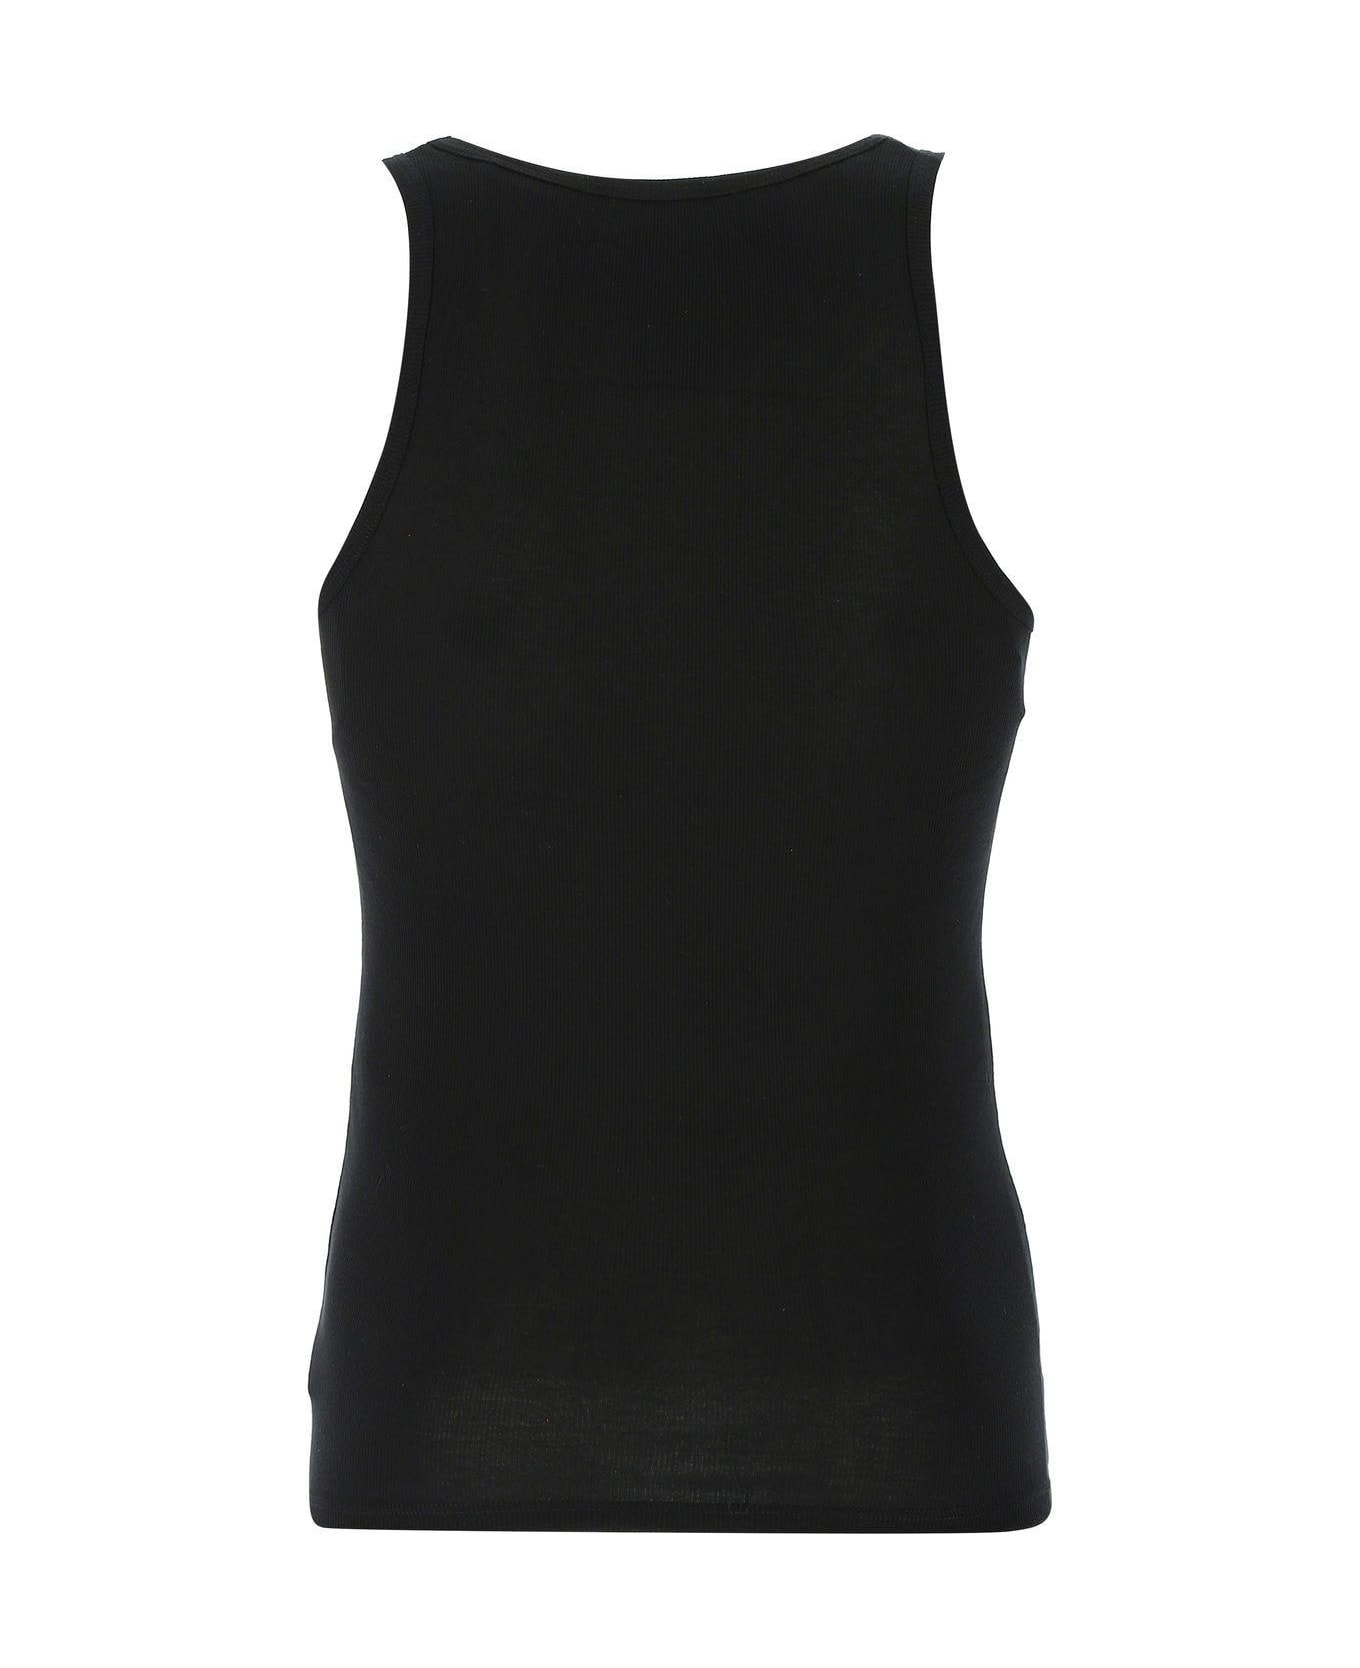 Tom Ford Black Cotton And Modal Tank Top - BLACK